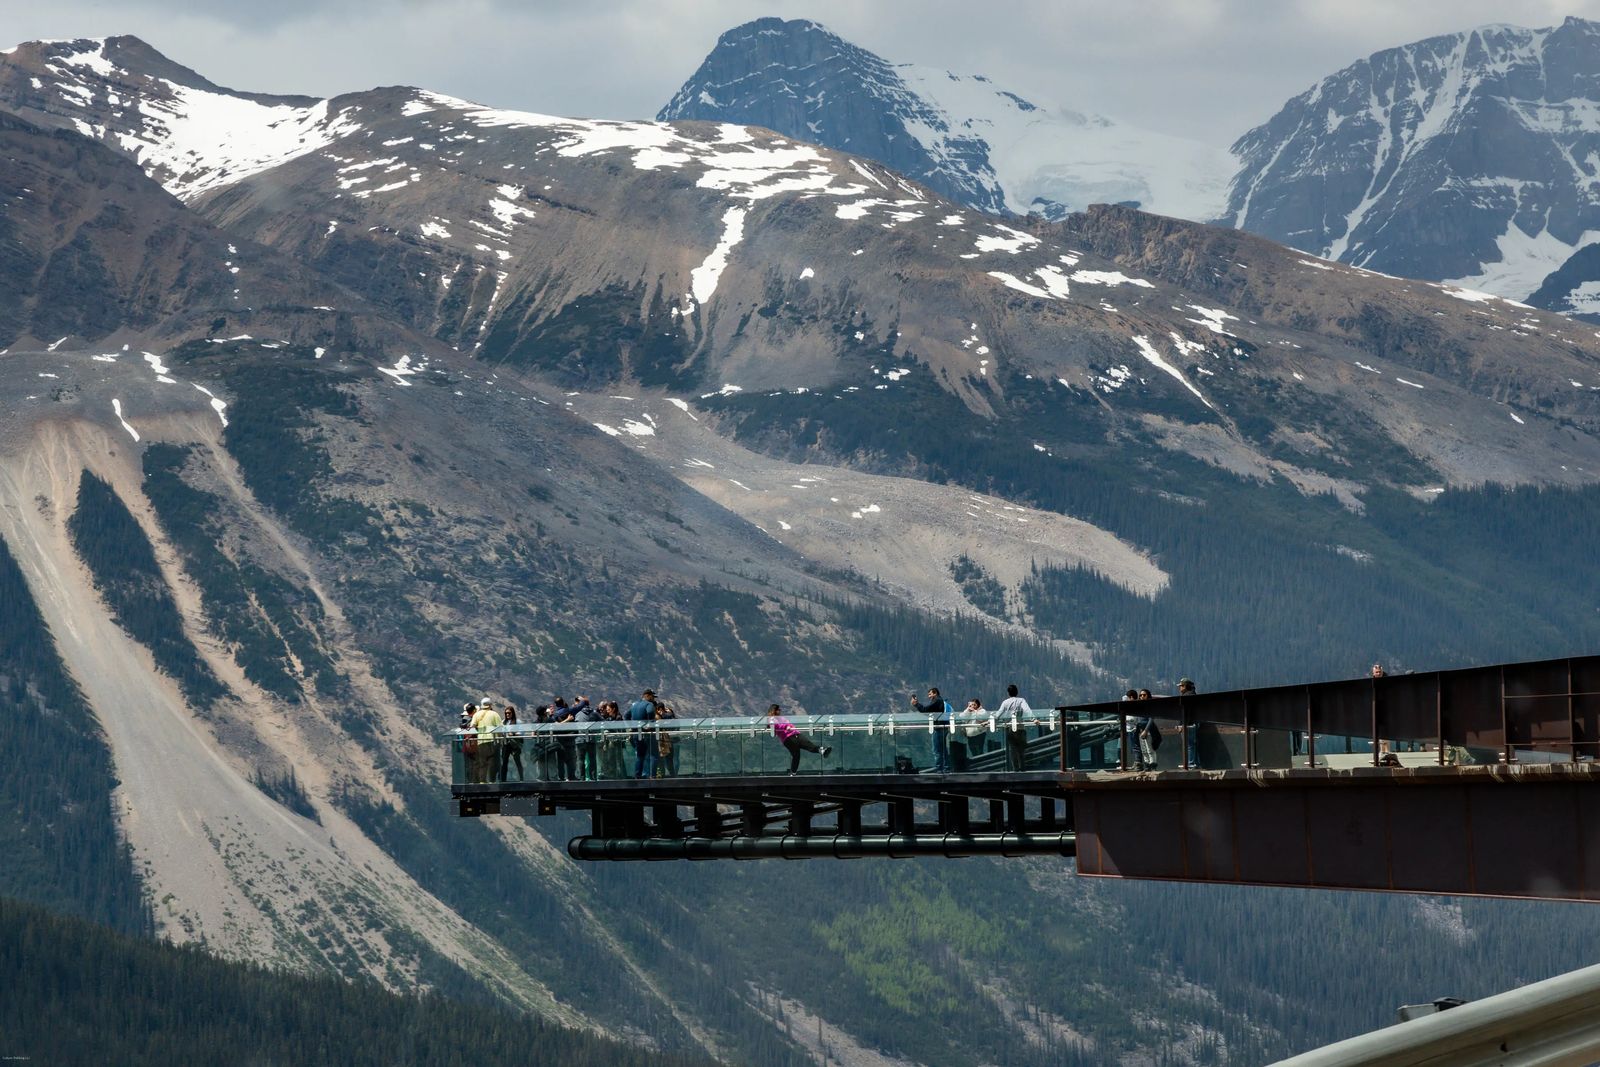 Skywalk at the Columbia Icefields - The BEST of the Icefields Parkway Banff